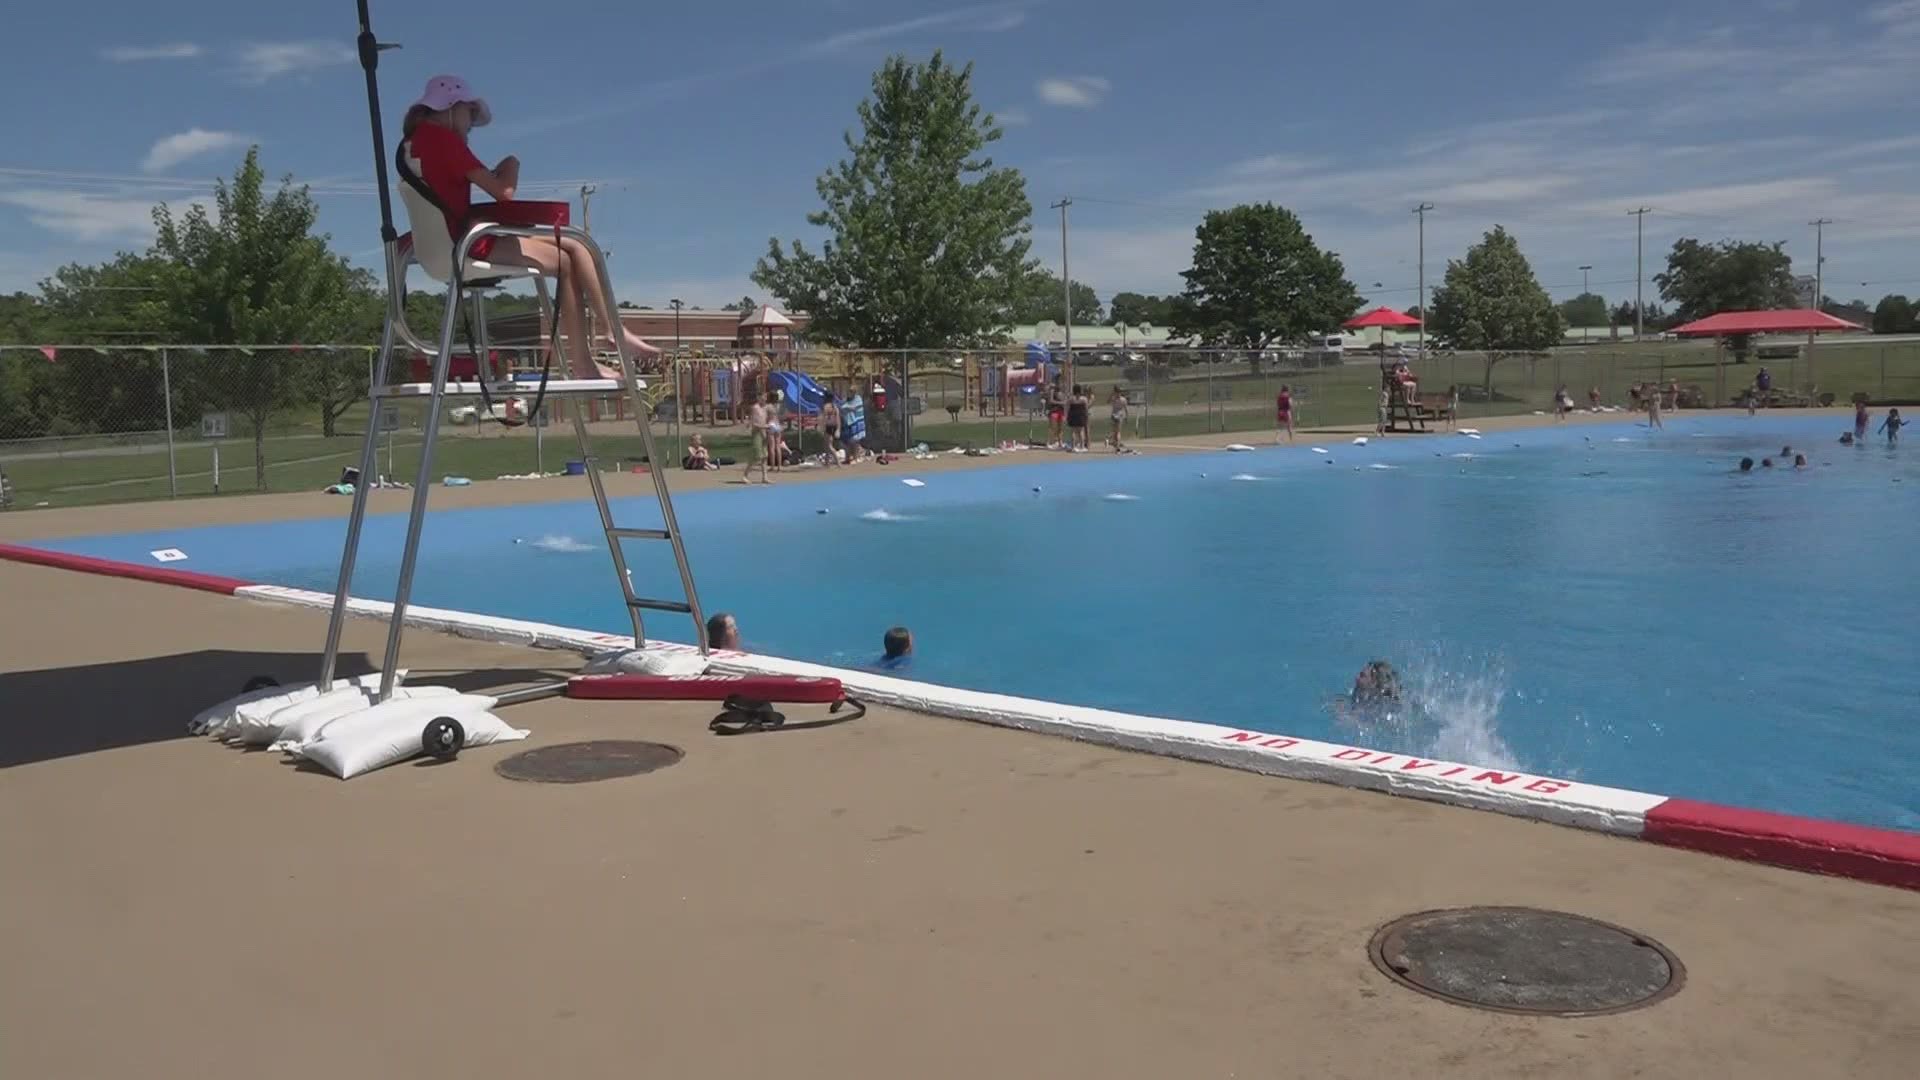 Many lifeguard training courses were put on hold due to the pandemic, which has left a number of Maine's public pools short-staffed.